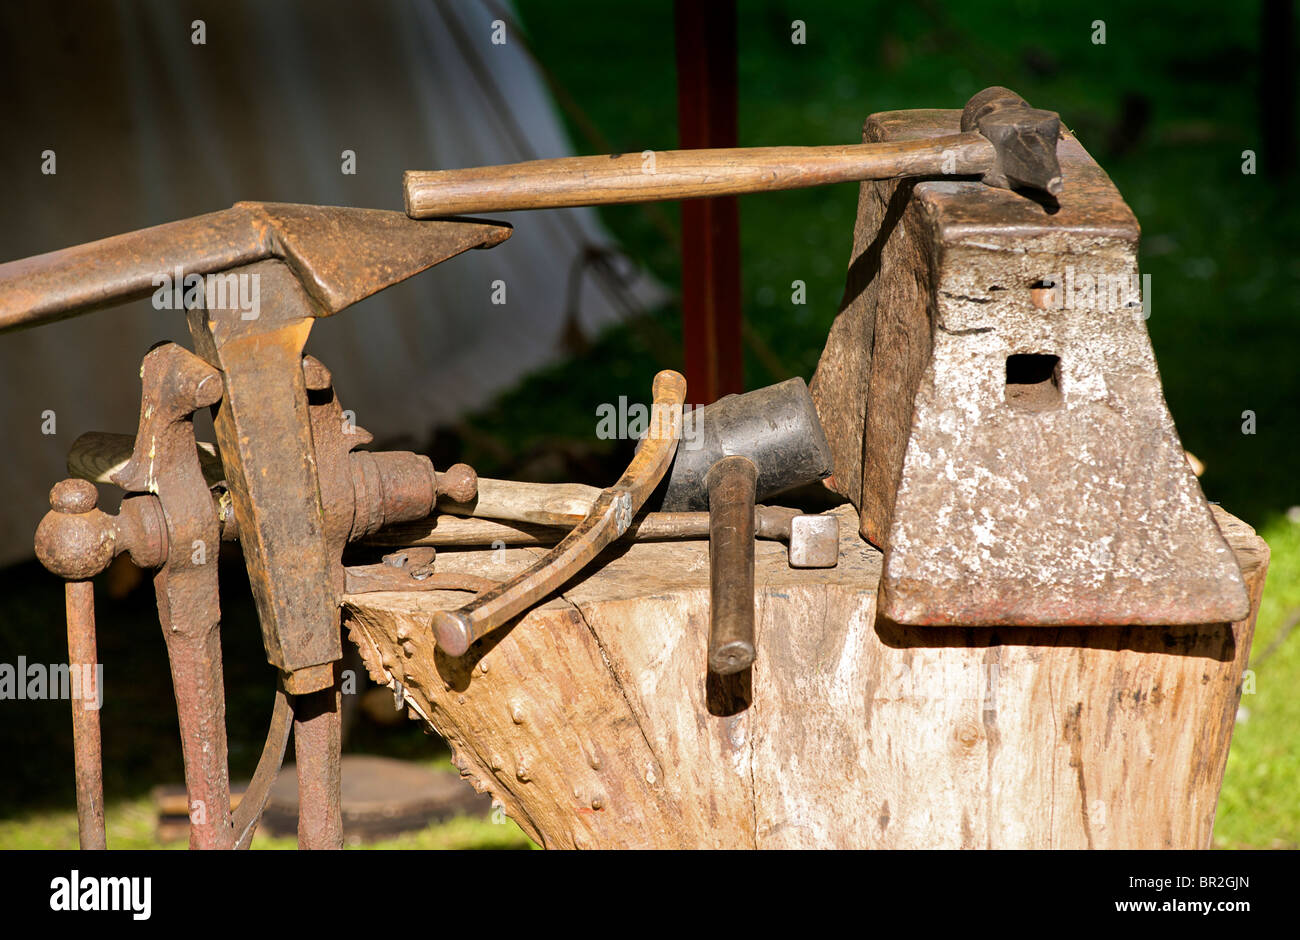 The tools of a blacksmith. Anvil and hammers Stock Photo